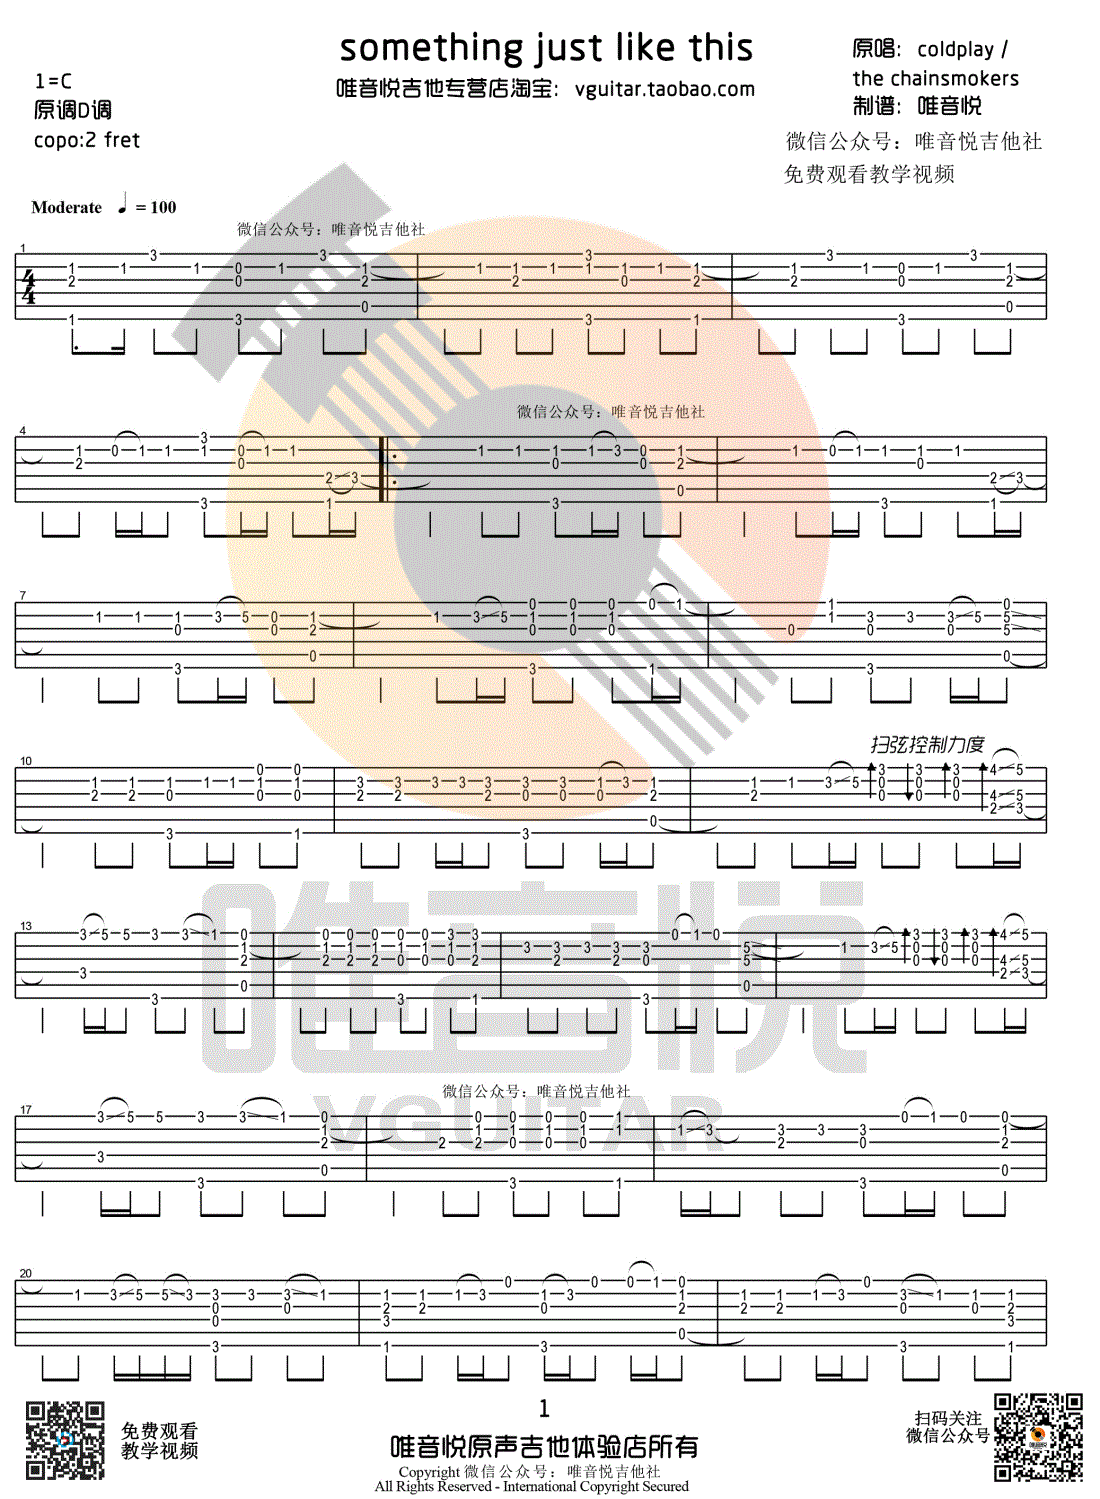 The,Chainsmokers《Something Just Like This 指弹 》吉他谱(C调)-Guitar Music Score